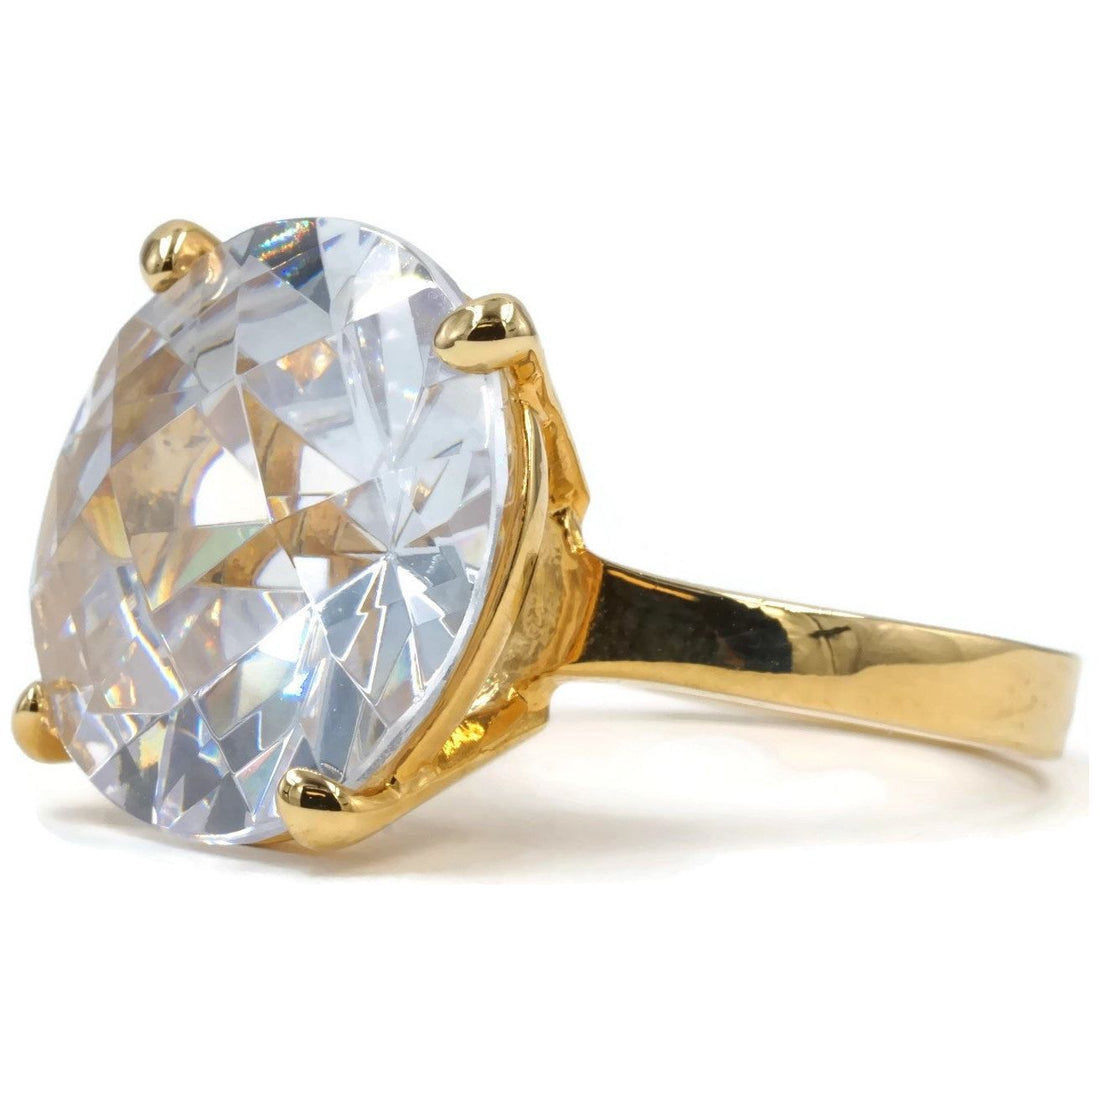 Oversized Gorgeous 14K Solitaire Cocktail Ring